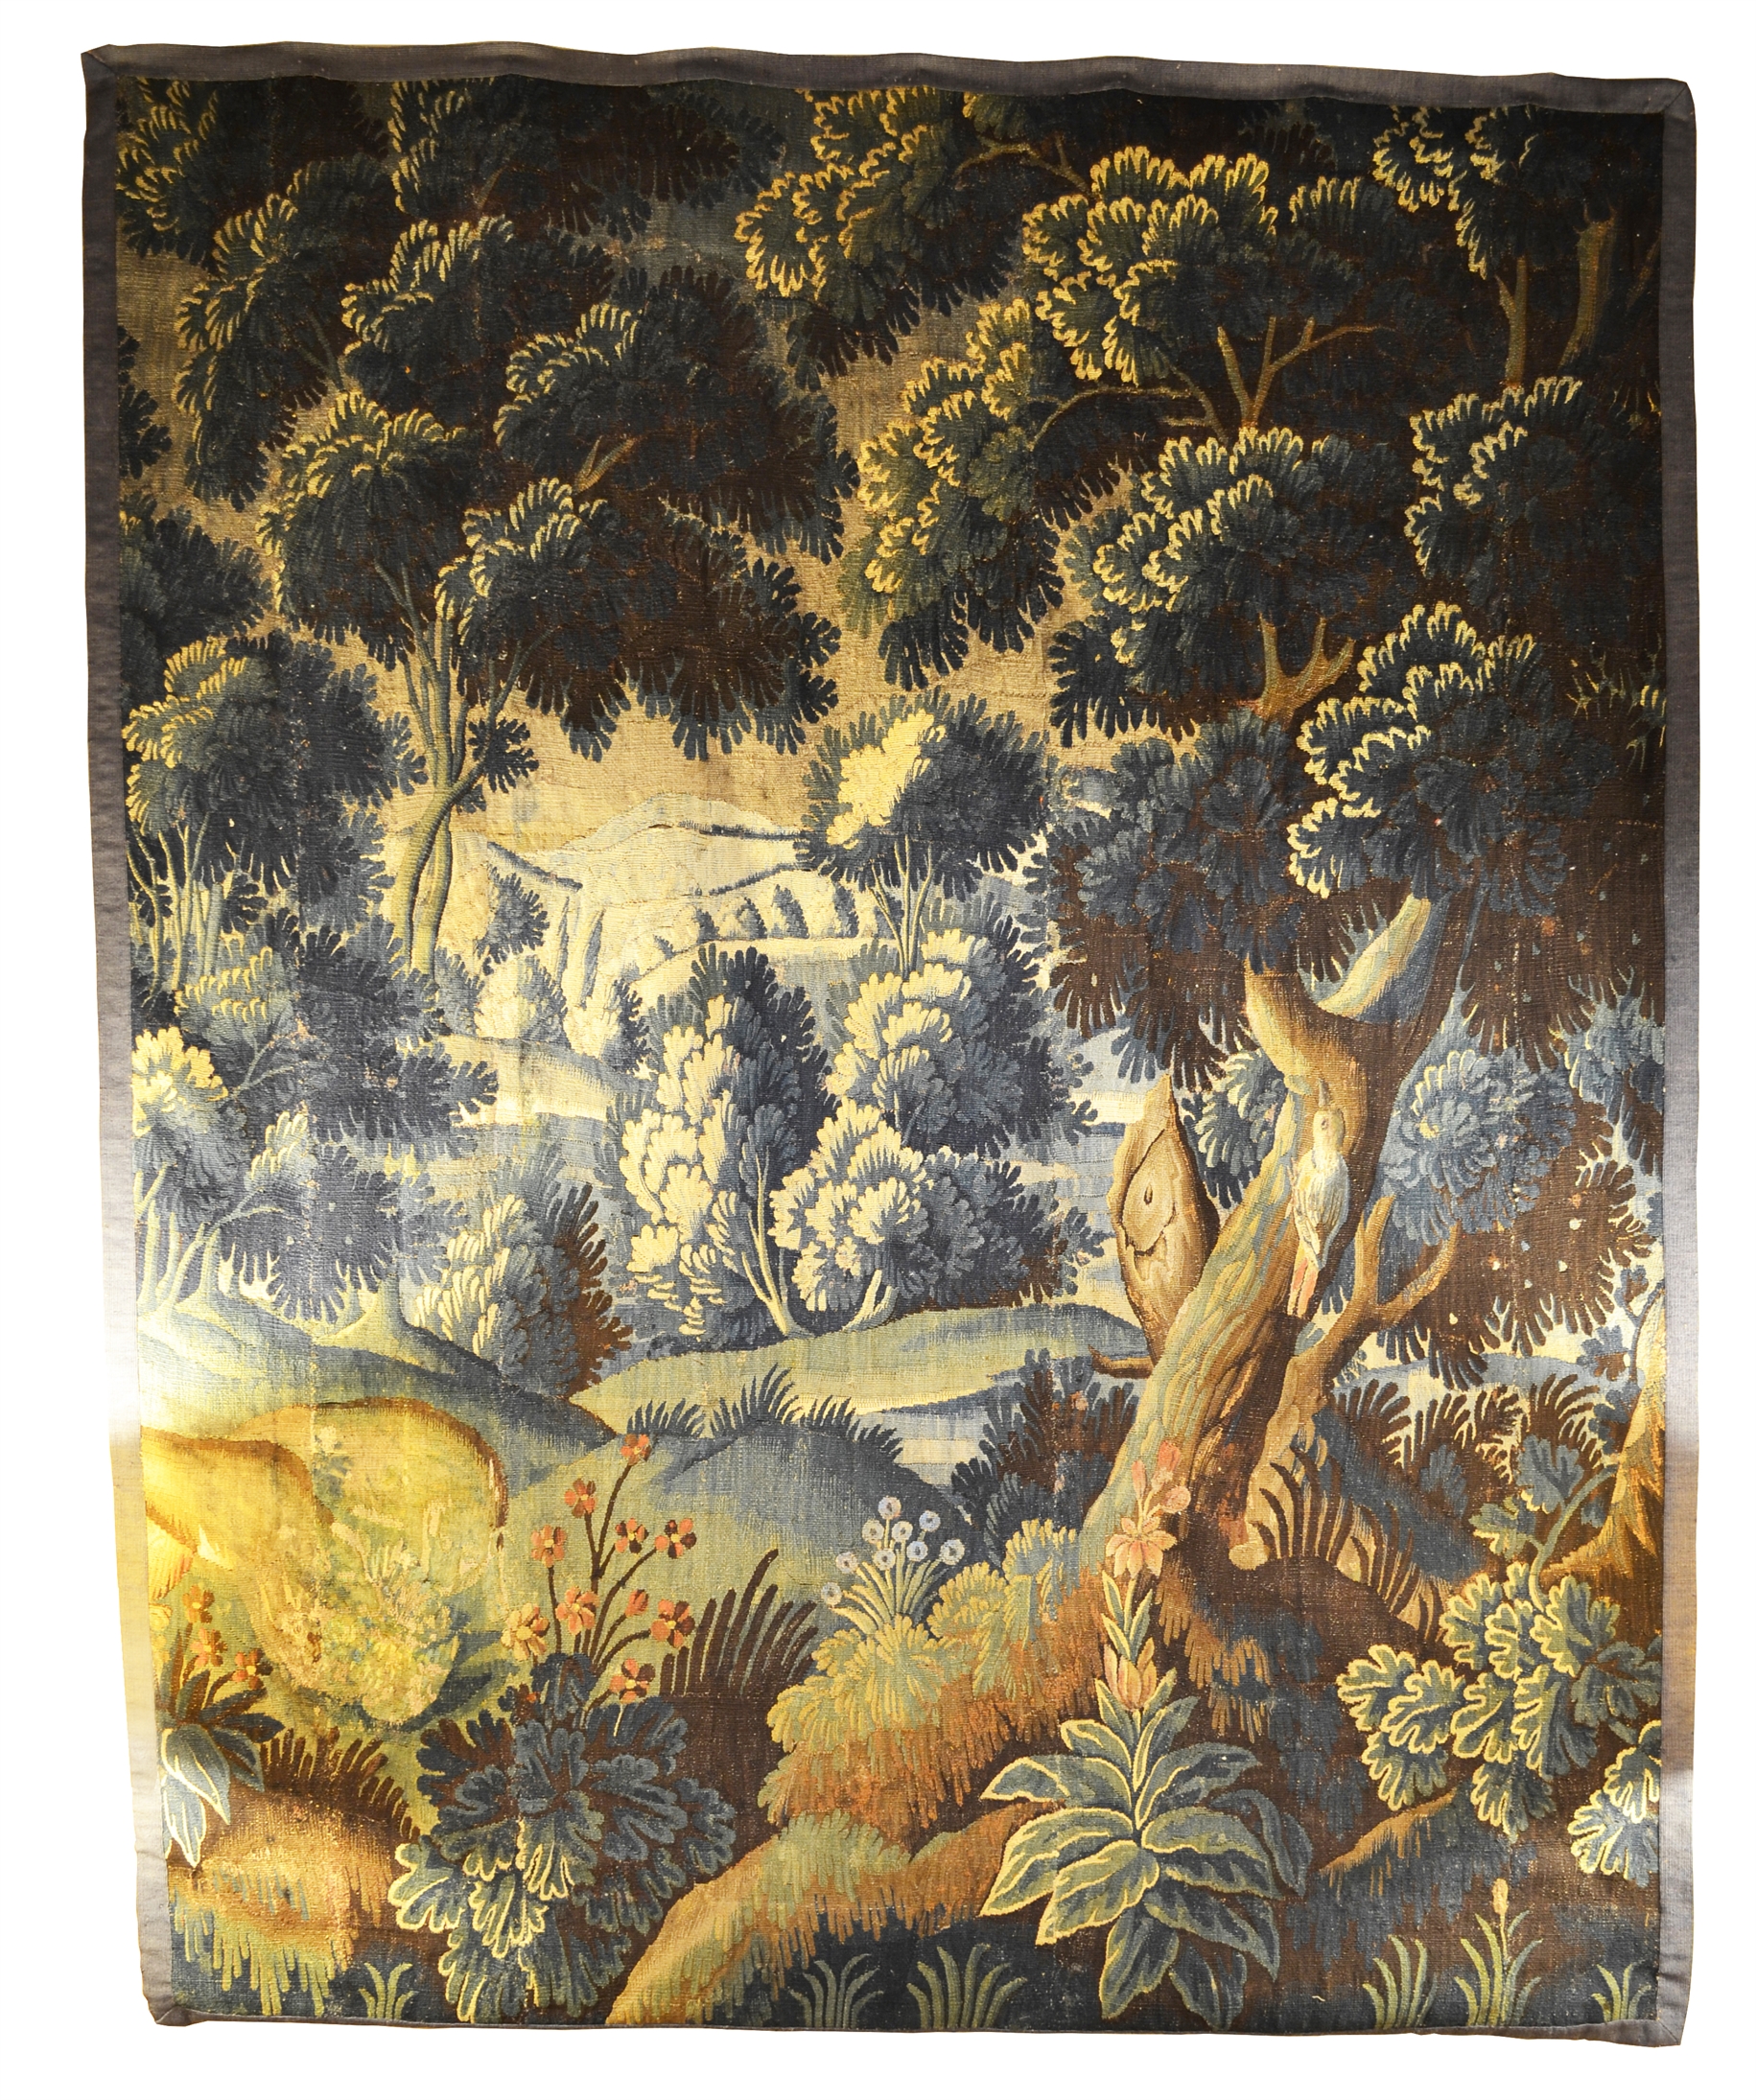 128/2021 - Tapestry with Landscape Motiff